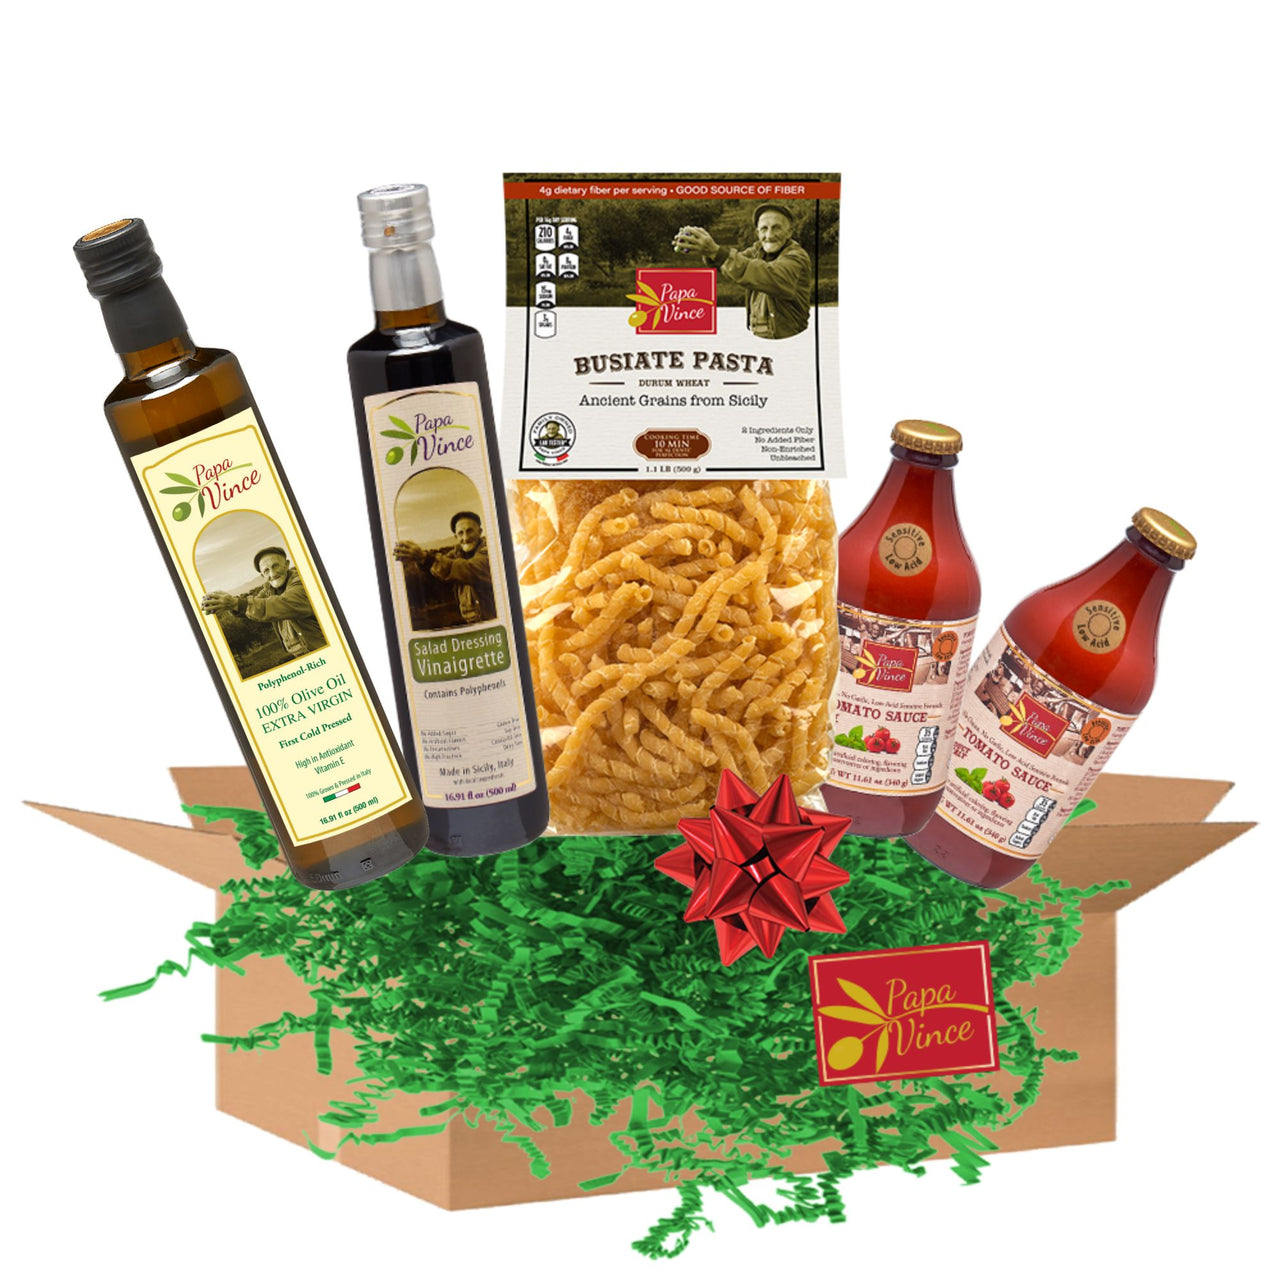 Food Basket Gift from Sicily - Gourmet Farm Fresh Clean Food from Artisans in Italy | Extra Virgin Olive Oil, Salad Dressing, Busiate Durum Pasta, Cherry Tomato Sauce | Papa Vince